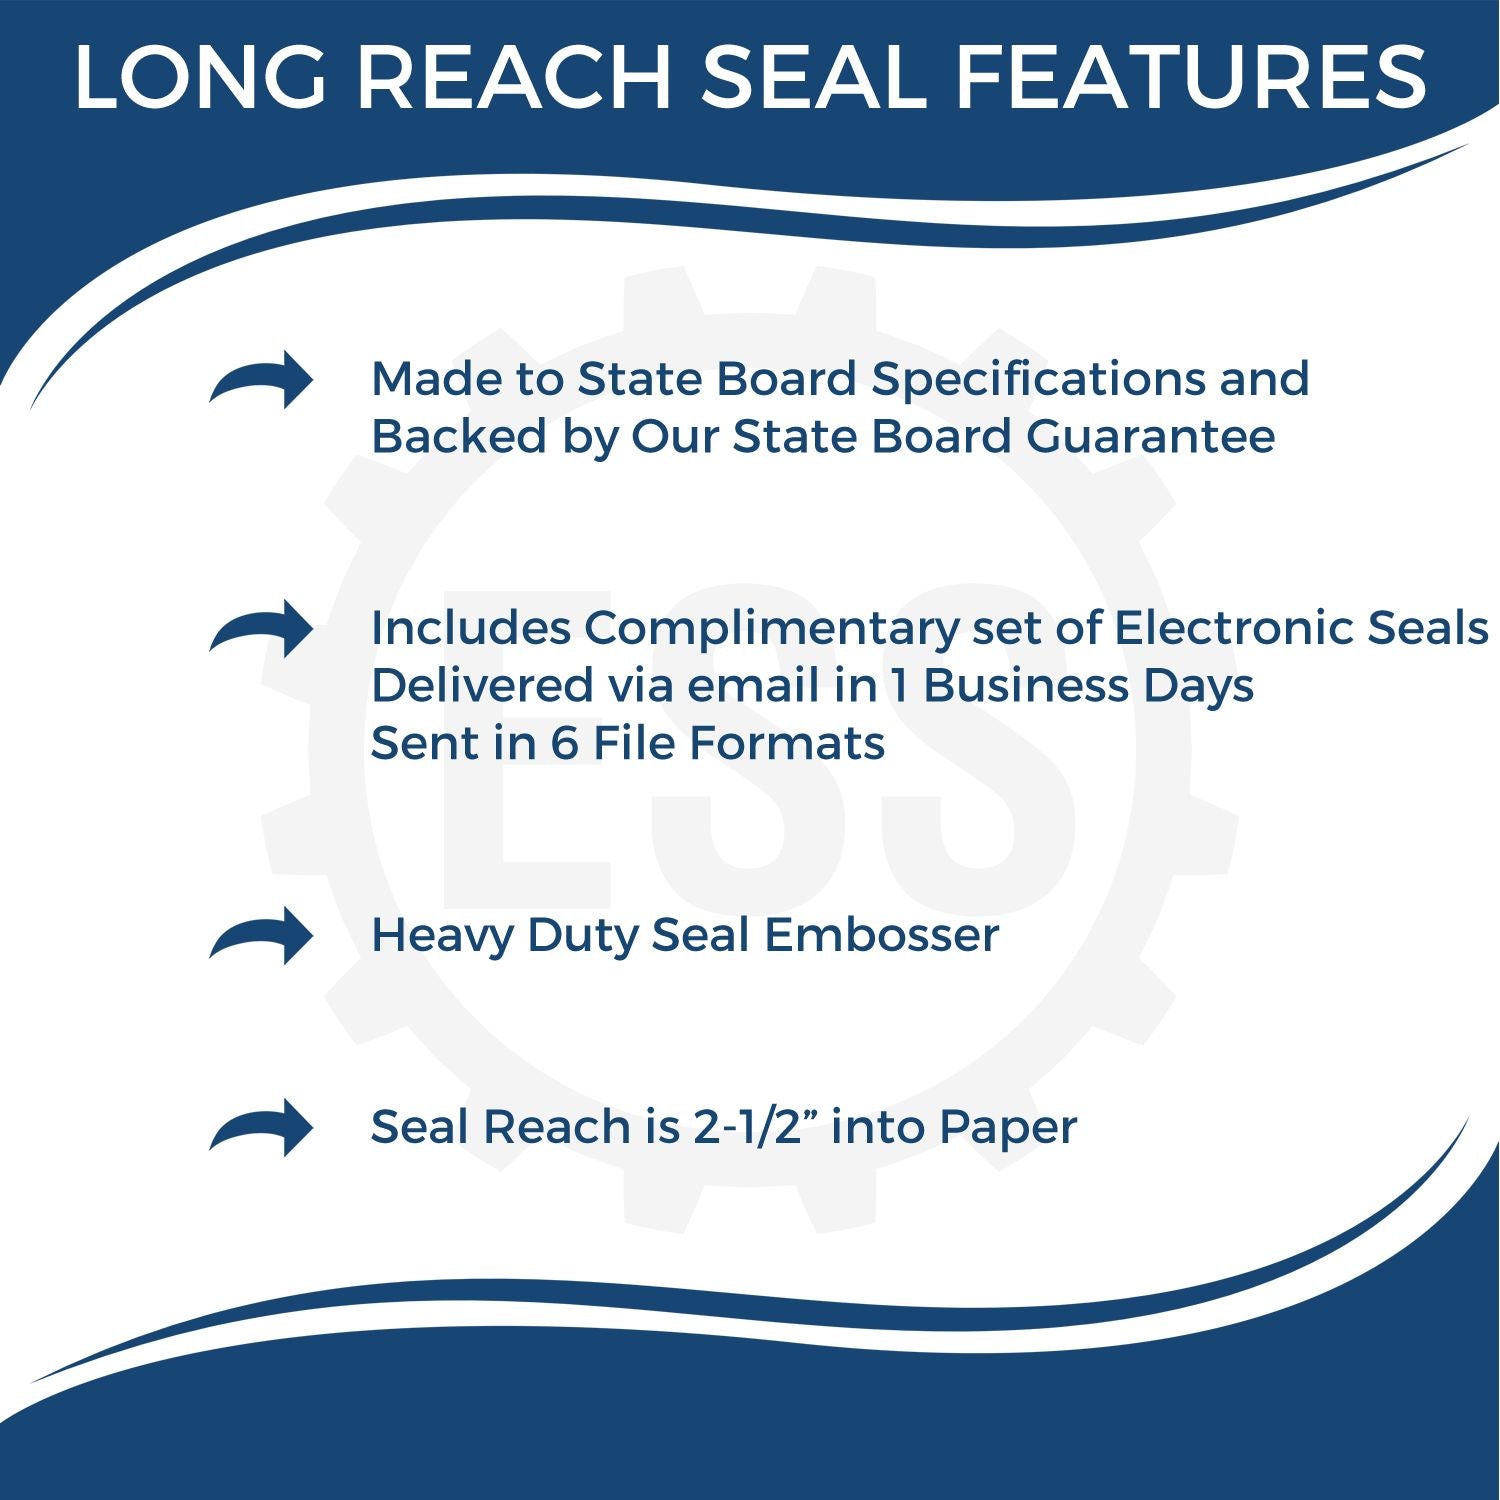 A picture of an infographic highlighting the selling points for the Long Reach Tennessee Land Surveyor Seal